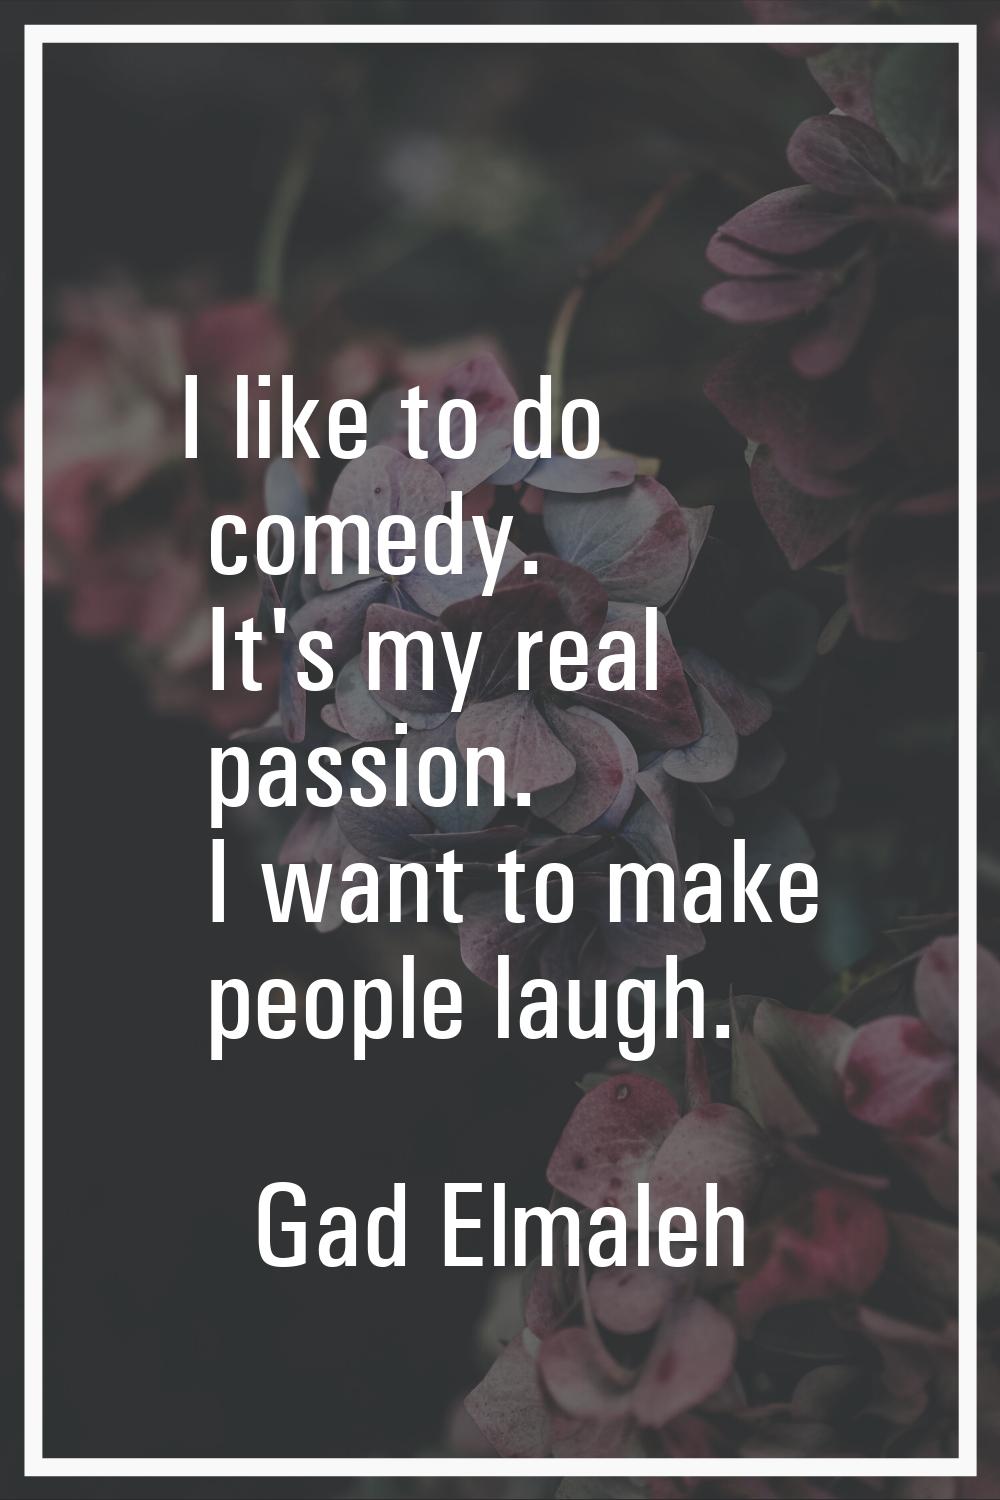 I like to do comedy. It's my real passion. I want to make people laugh.